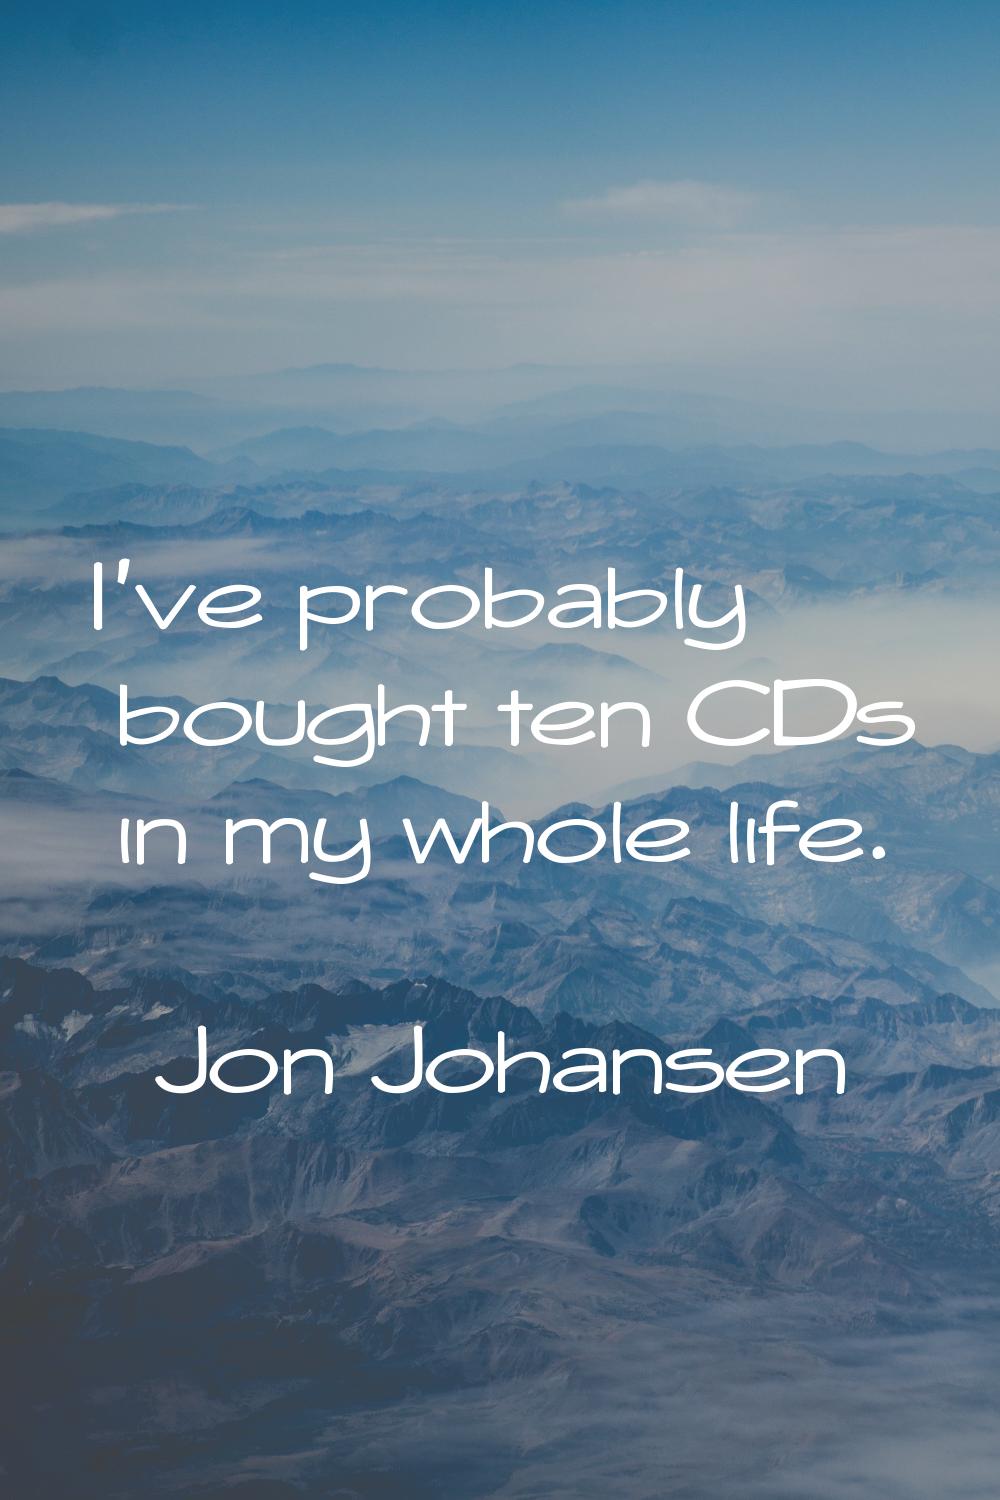 I've probably bought ten CDs in my whole life.